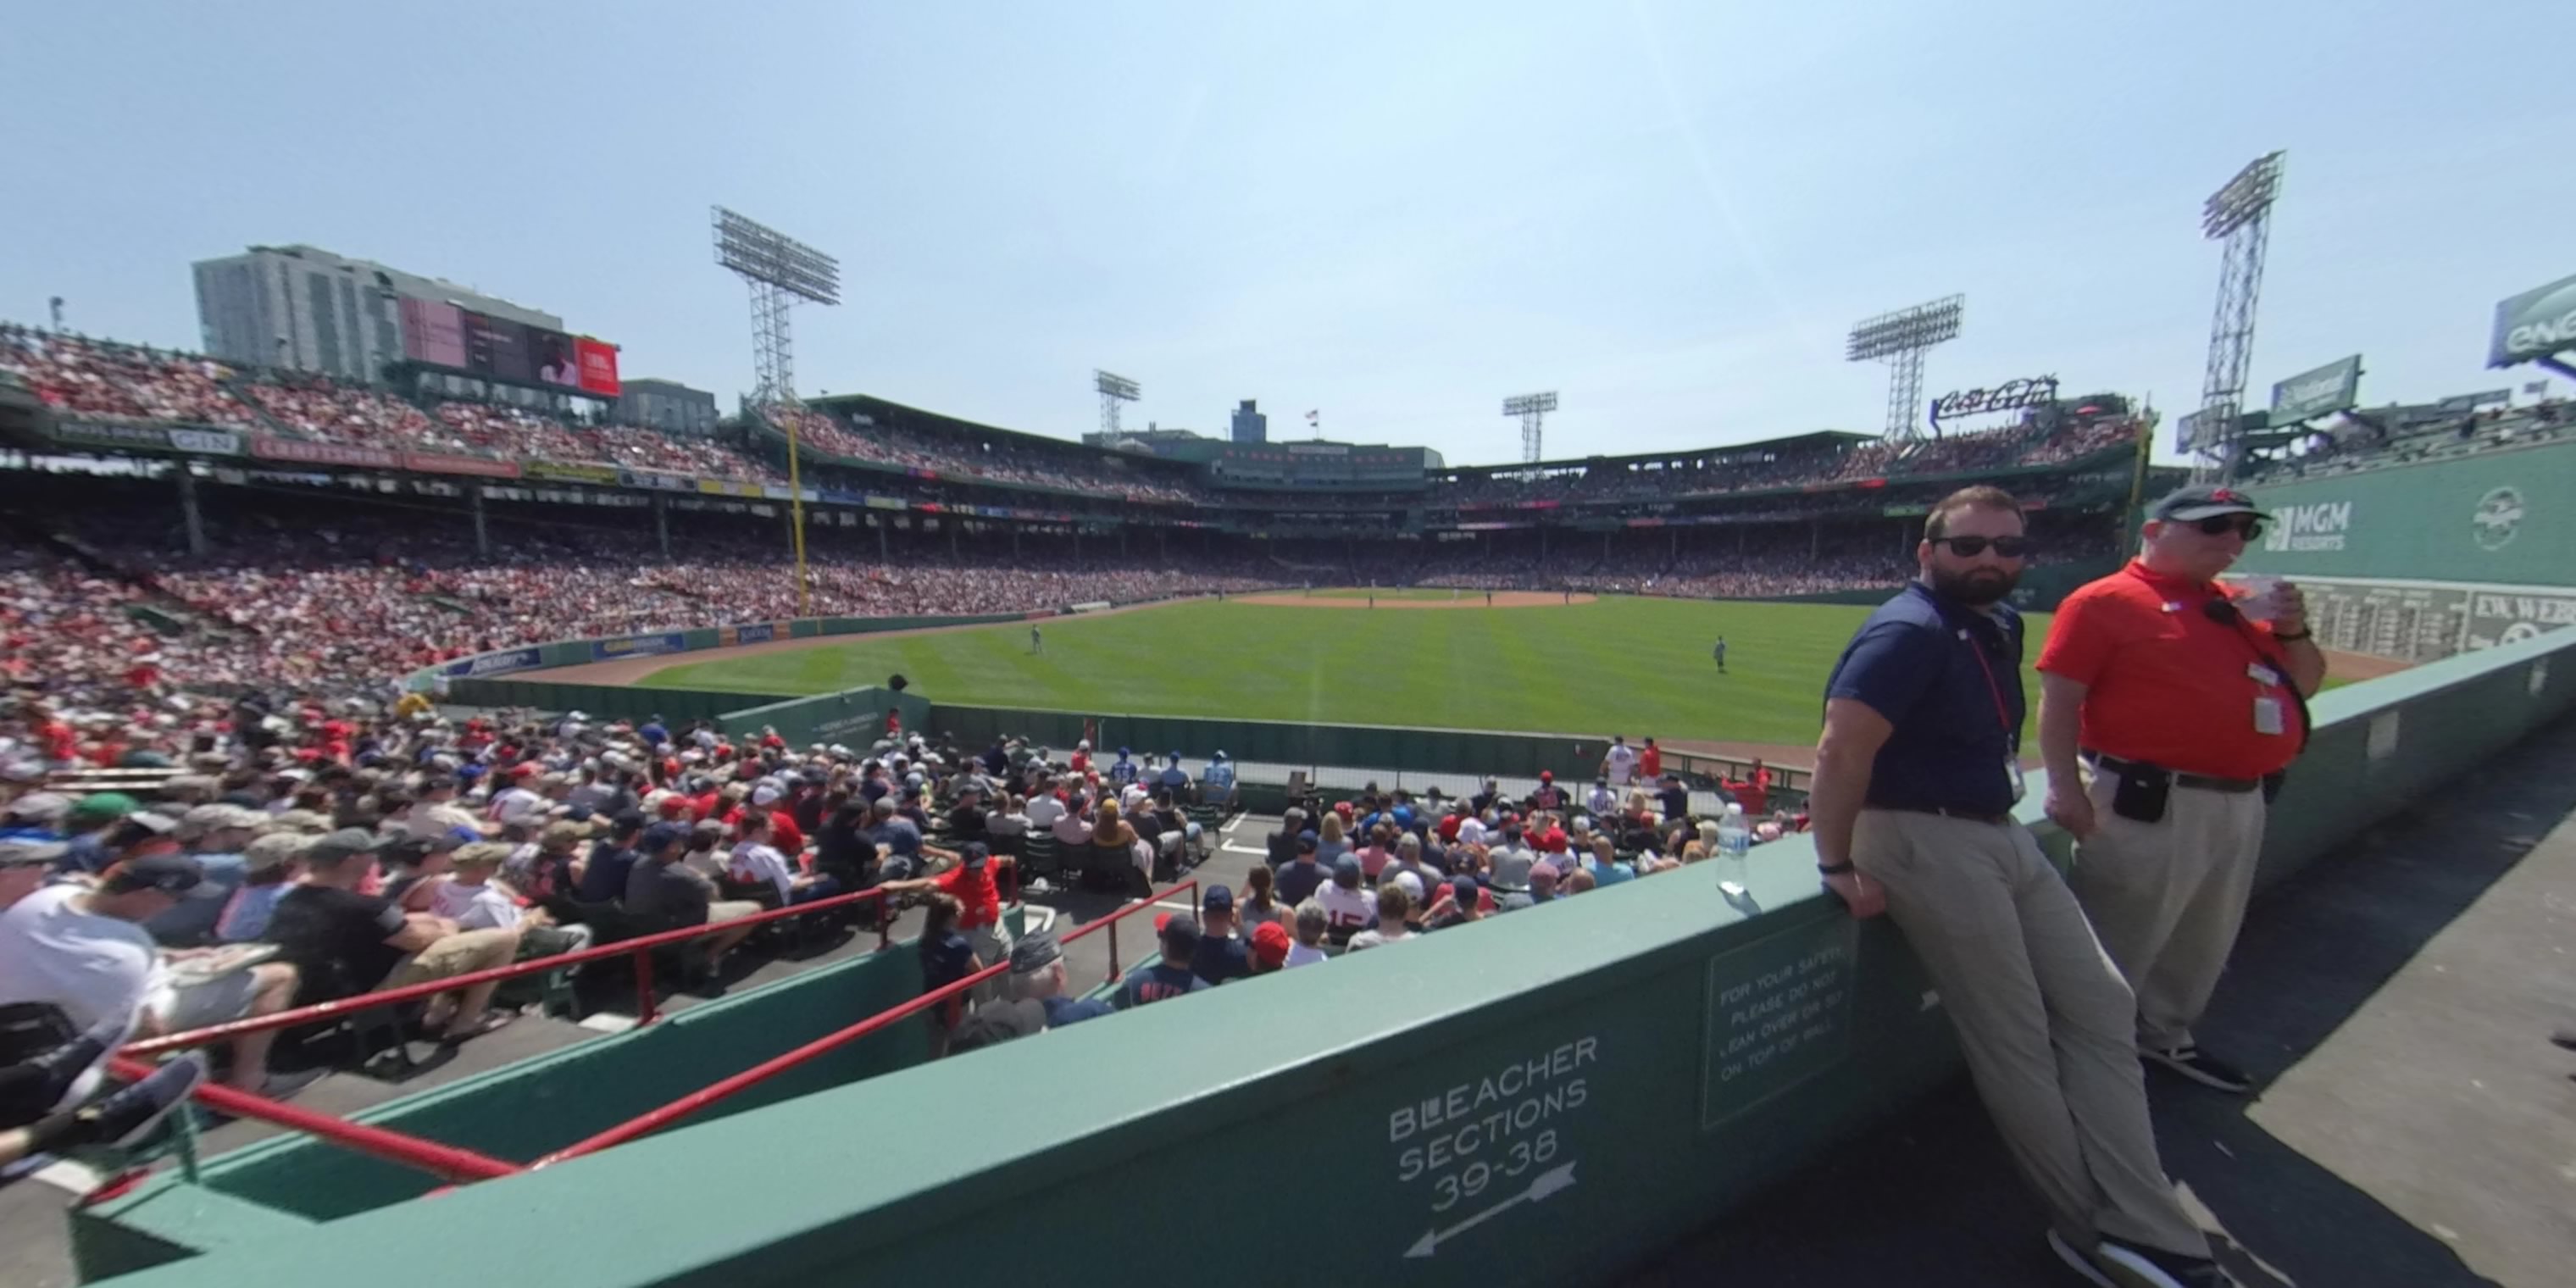 bleachers 38 panoramic seat view  for baseball - fenway park